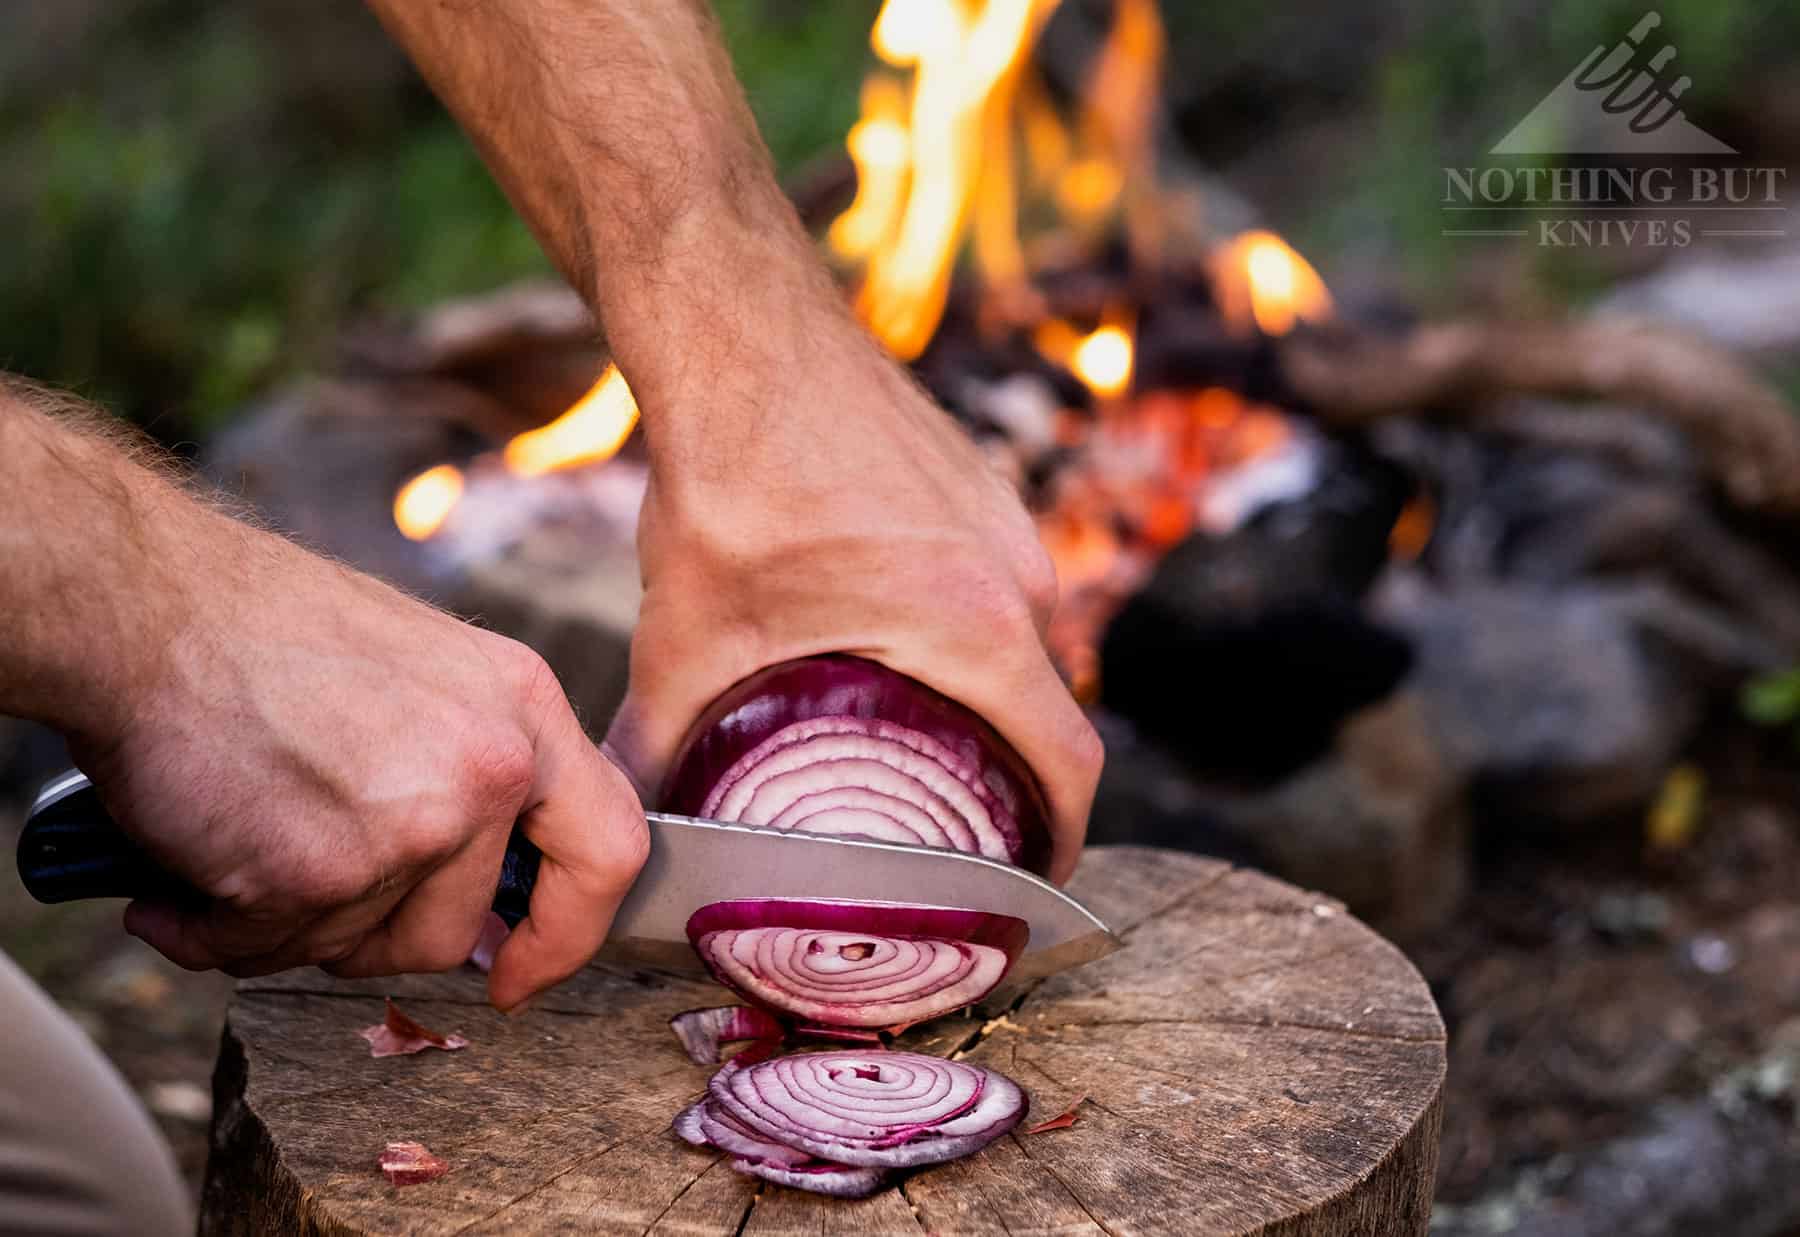 A close-up of the Ridgeback bushcraft knife being used to slice an onion by a campfire.